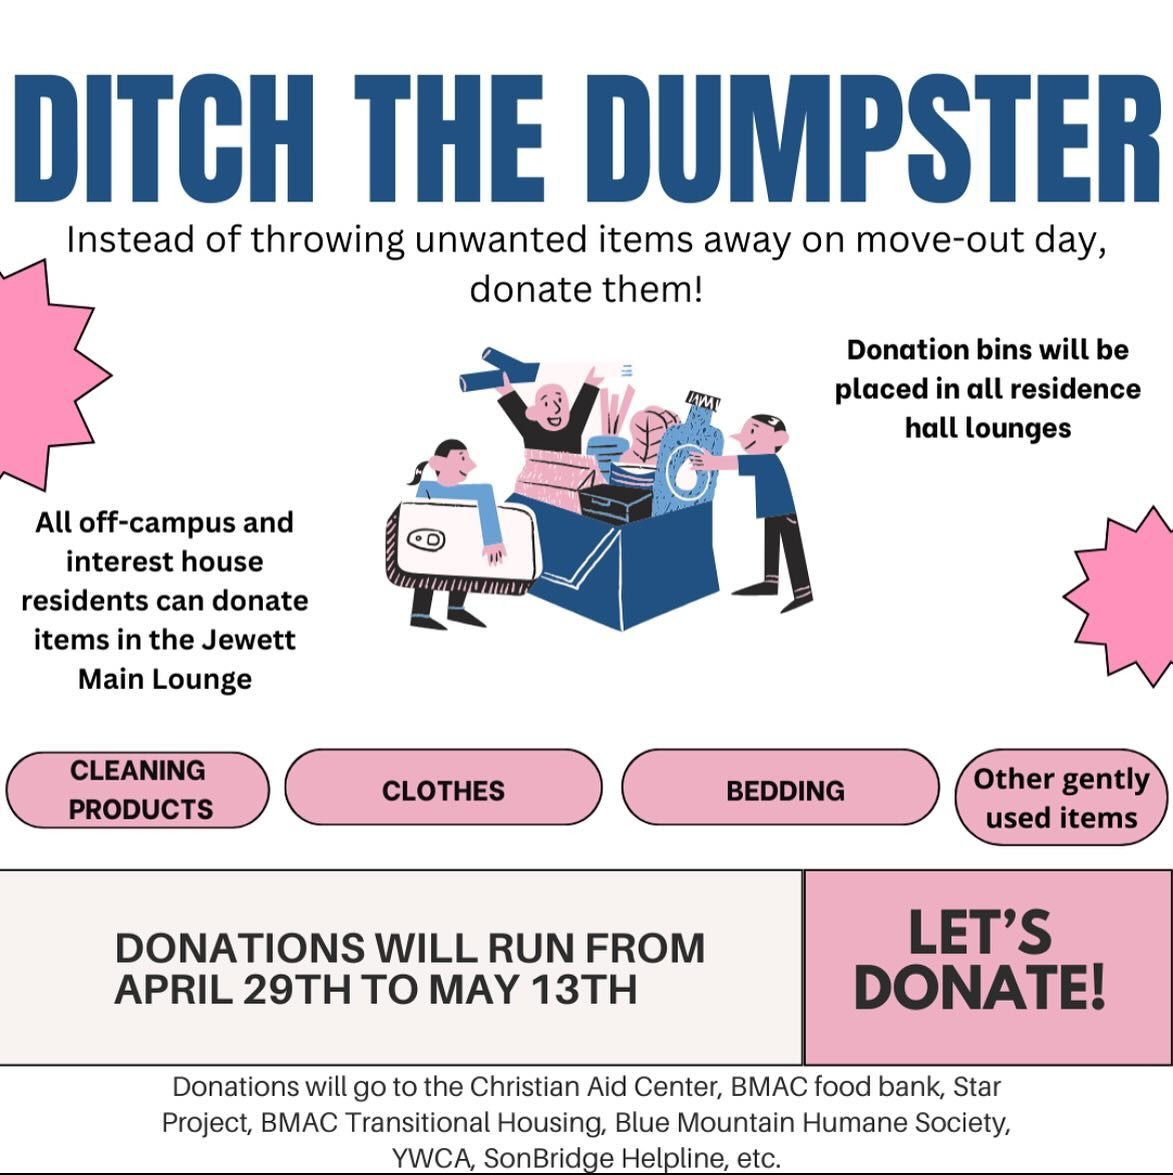 Do you have gently used items that you want to get rid of as move-out is around the corner? Ditch the Dumpster by dropping off your unwanted items in the main lounge of your resident hall. If you are living off campus, you can donate your items in th